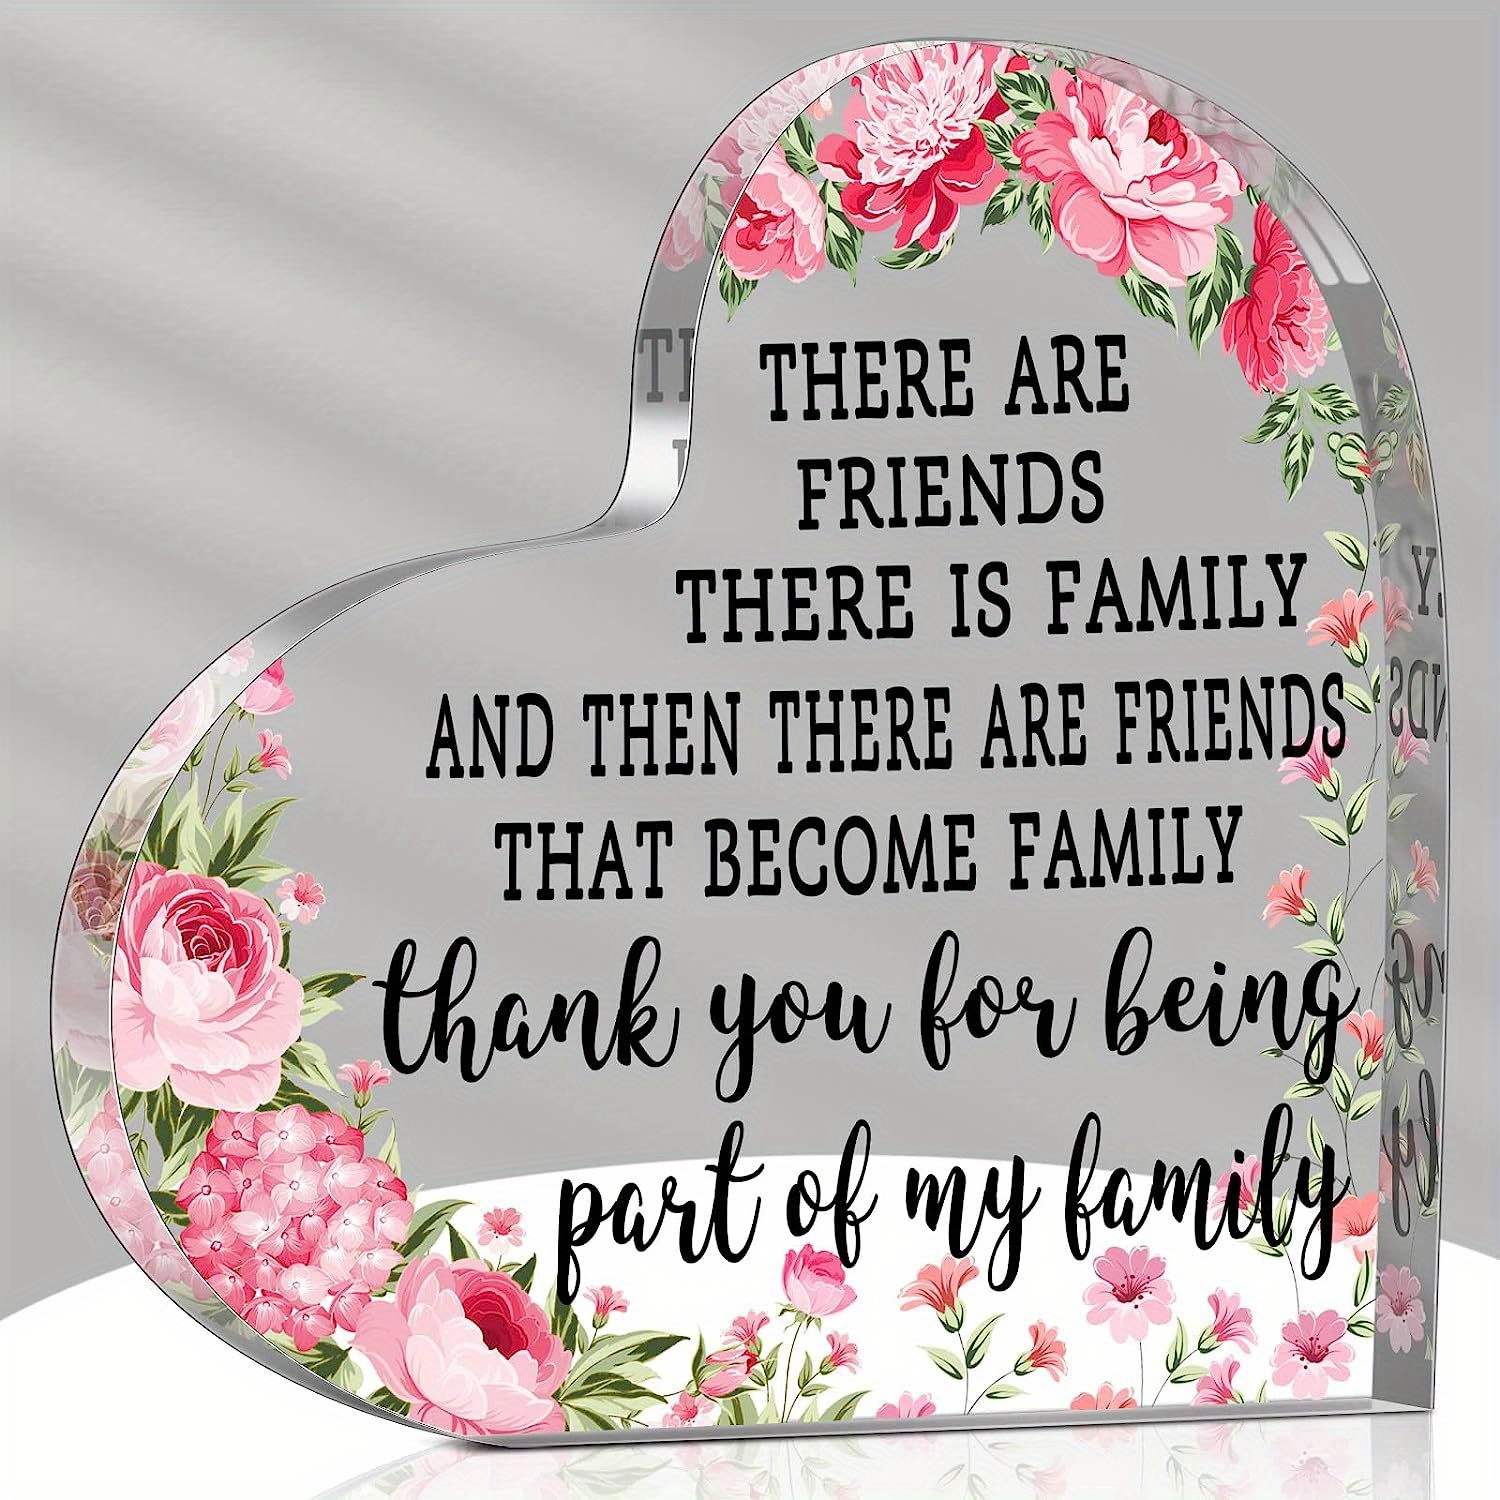 Best Friend Gift,1pc, Acrylic Gifts For Friends,Friendship Gifts For Women,Birthday  Gifts For Friends,Farewell Gifts, Plaque For Colleagues,Retirement Gifts,Acrylic  Heart Friendship Keepsake Decoration,Room Decor,Desk Decor,Office  Decor,Special